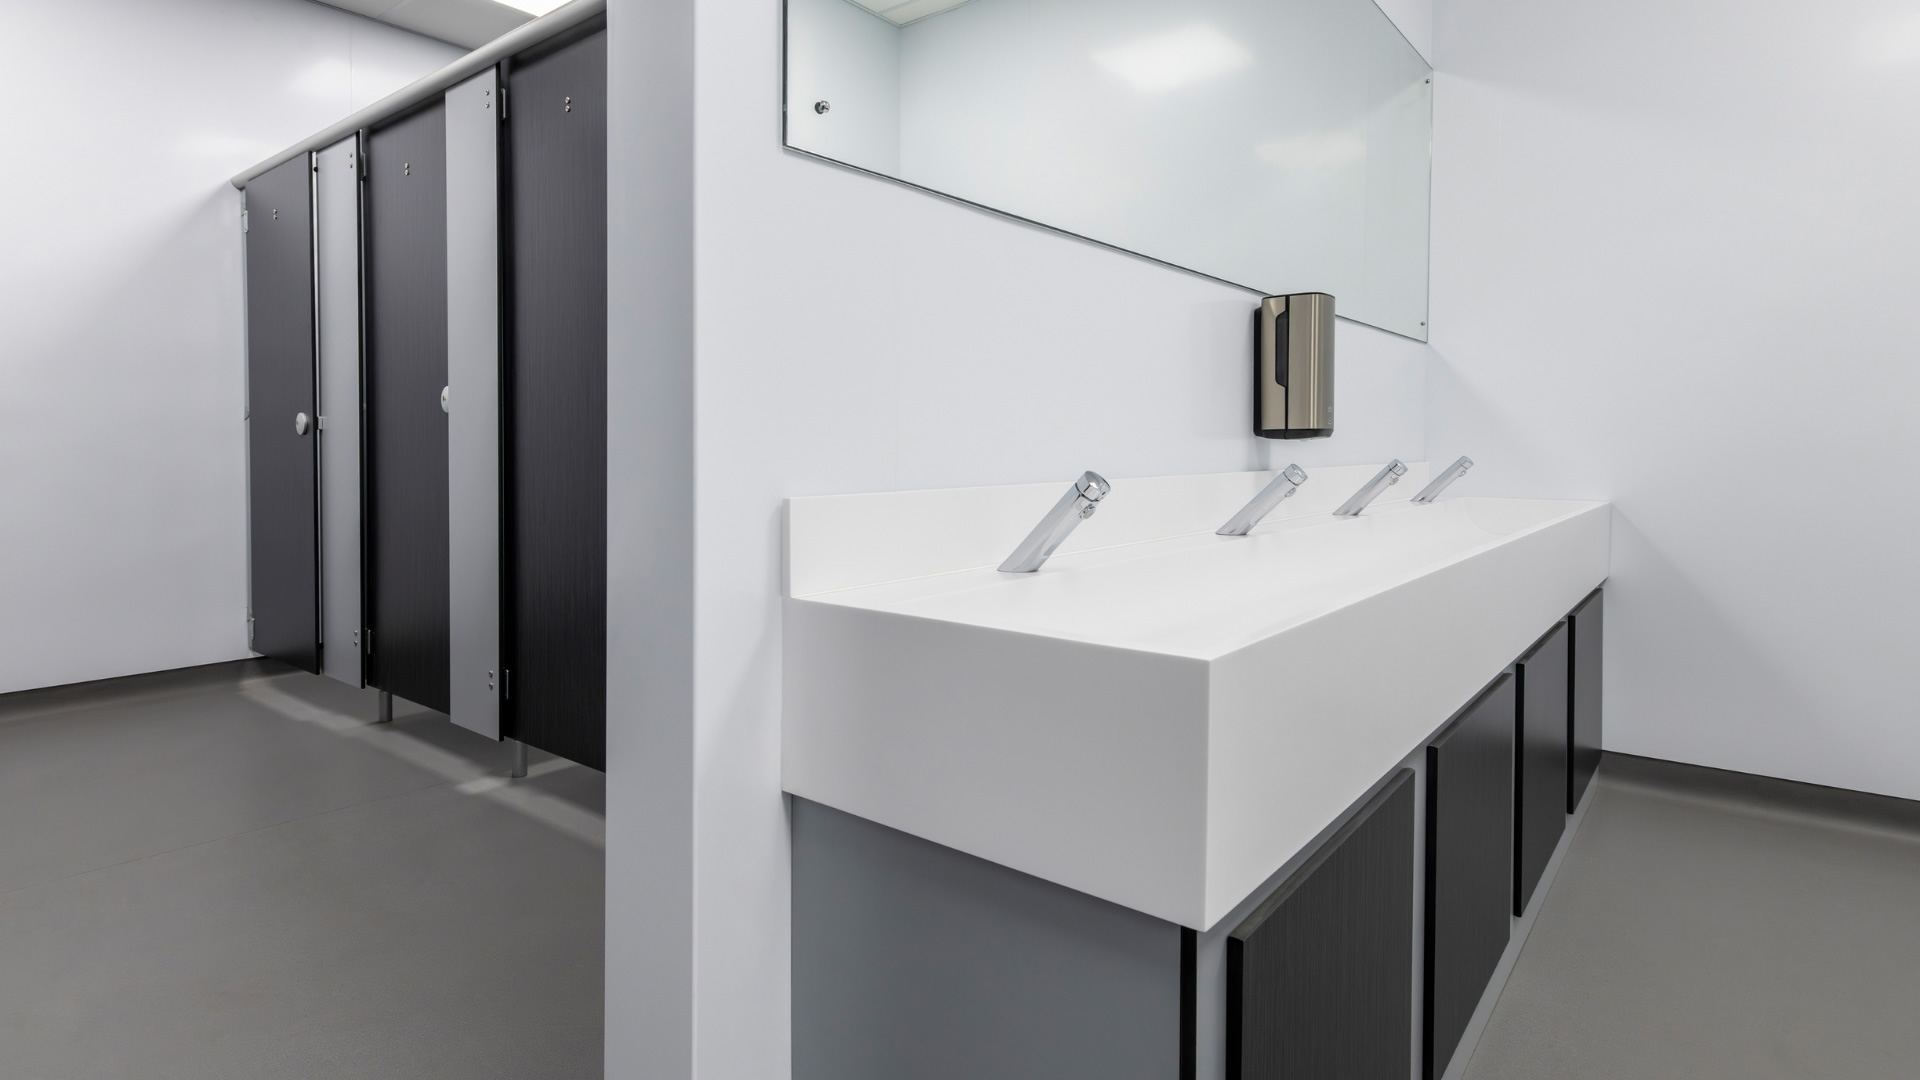 Clean washroom cubicles and sinks